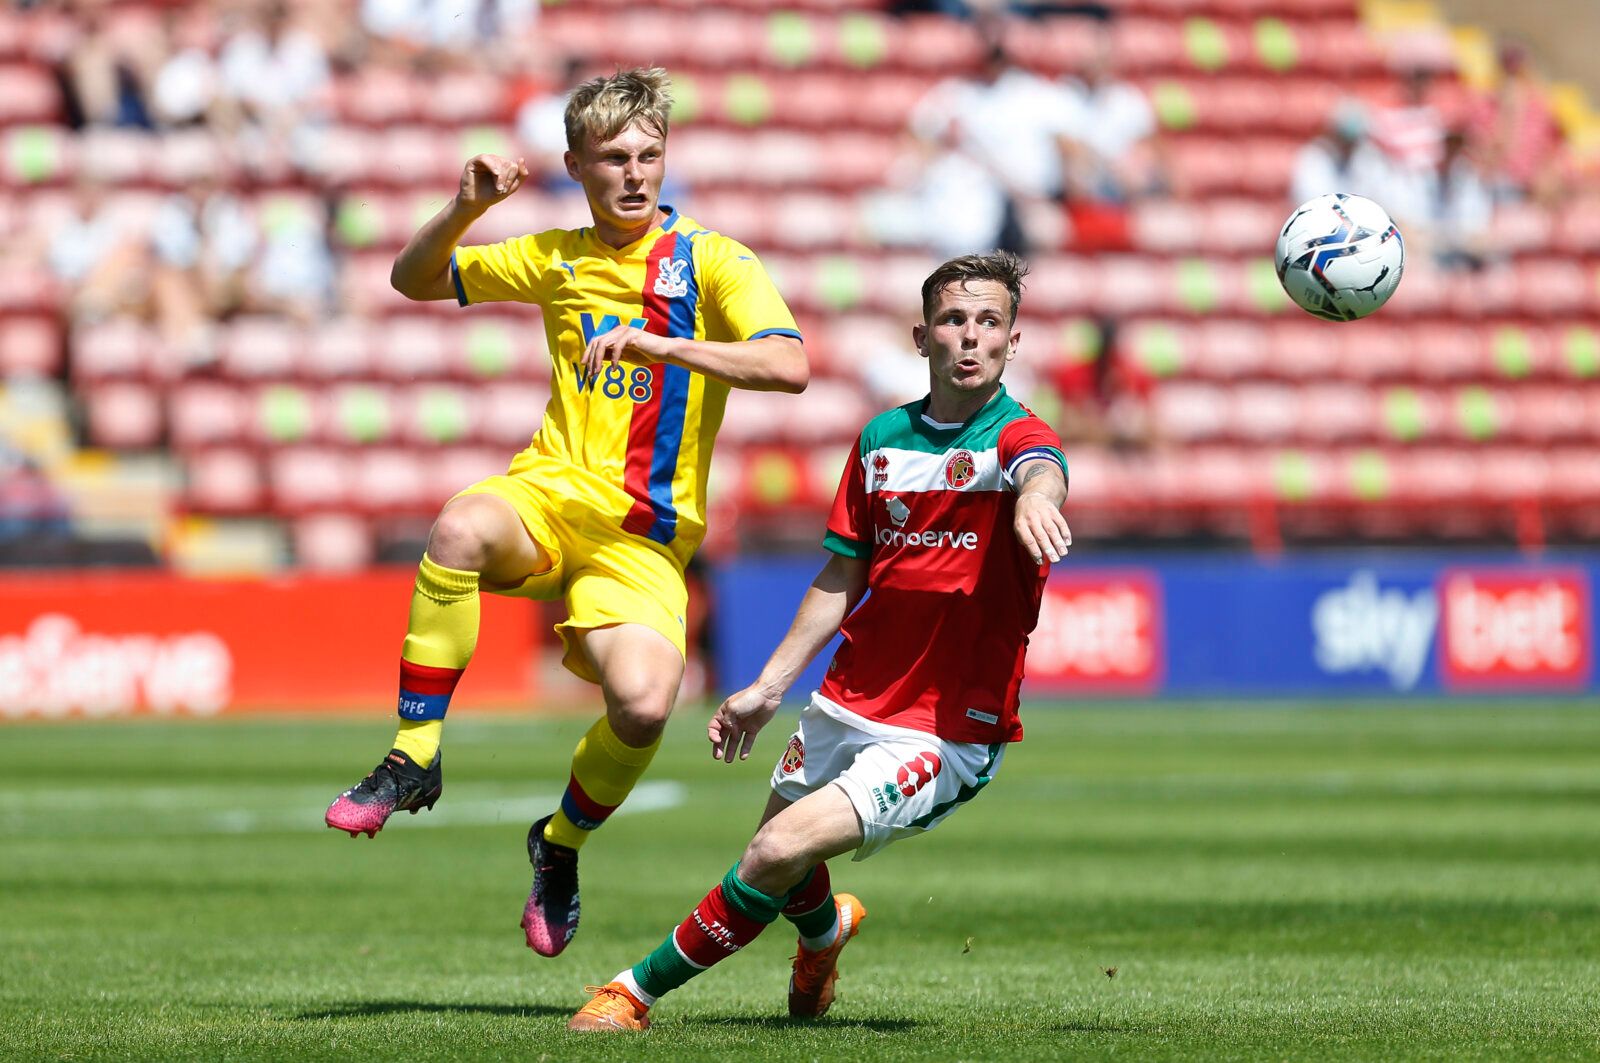 Soccer Football - Pre Season Friendly - Walsall v Crystal Palace - The Banks's Stadium, Walsall, Britain - July 17, 2021 Crystal Palace's Aidan Steele in action with Walsall's Liam Kinsella Action Images via Reuters/Craig Brough